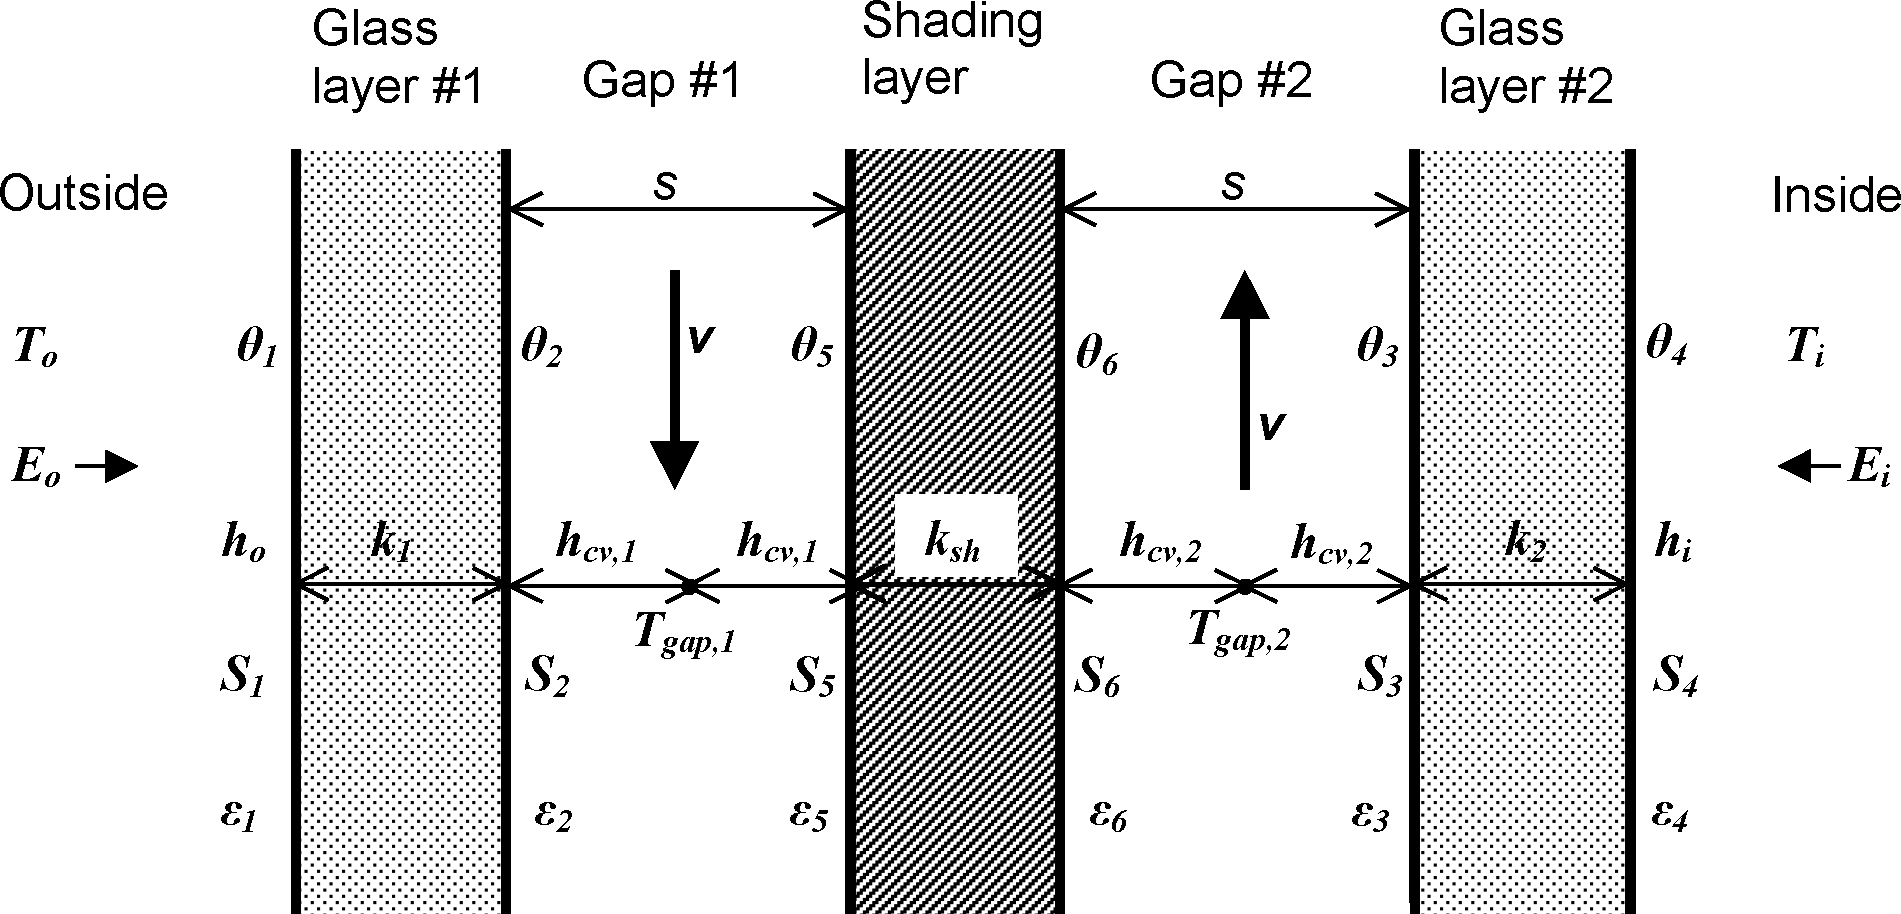 Glazing system with two glass layers and a between-glass shading device showing variables used in the heat balance equations. [fig:glazing-system-with-two-glass-layers-and-a]